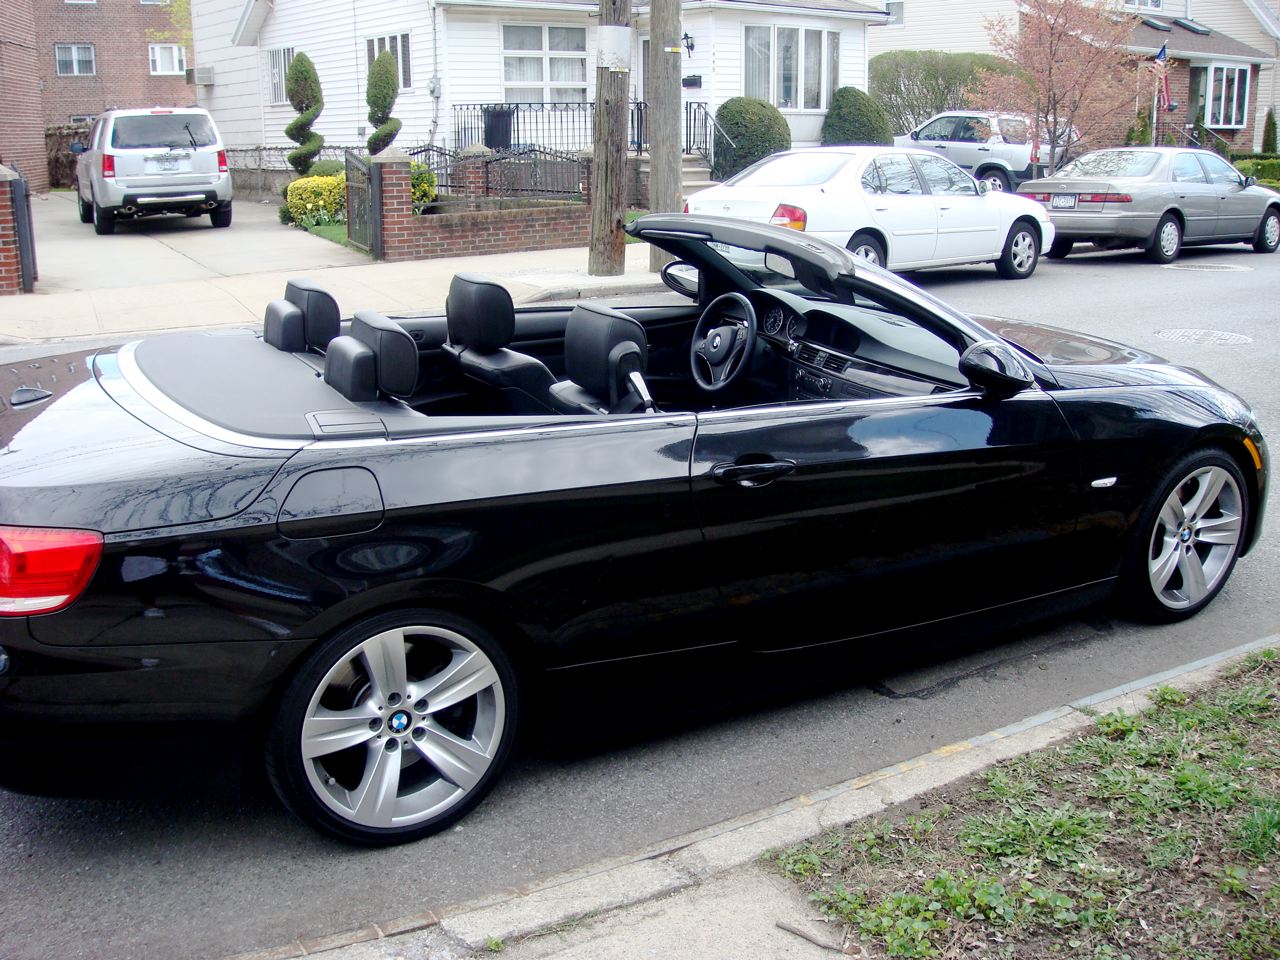 FS: 2008 BMW 335i Convertible E93 Fully Loaded $50,950 - BMW 3 